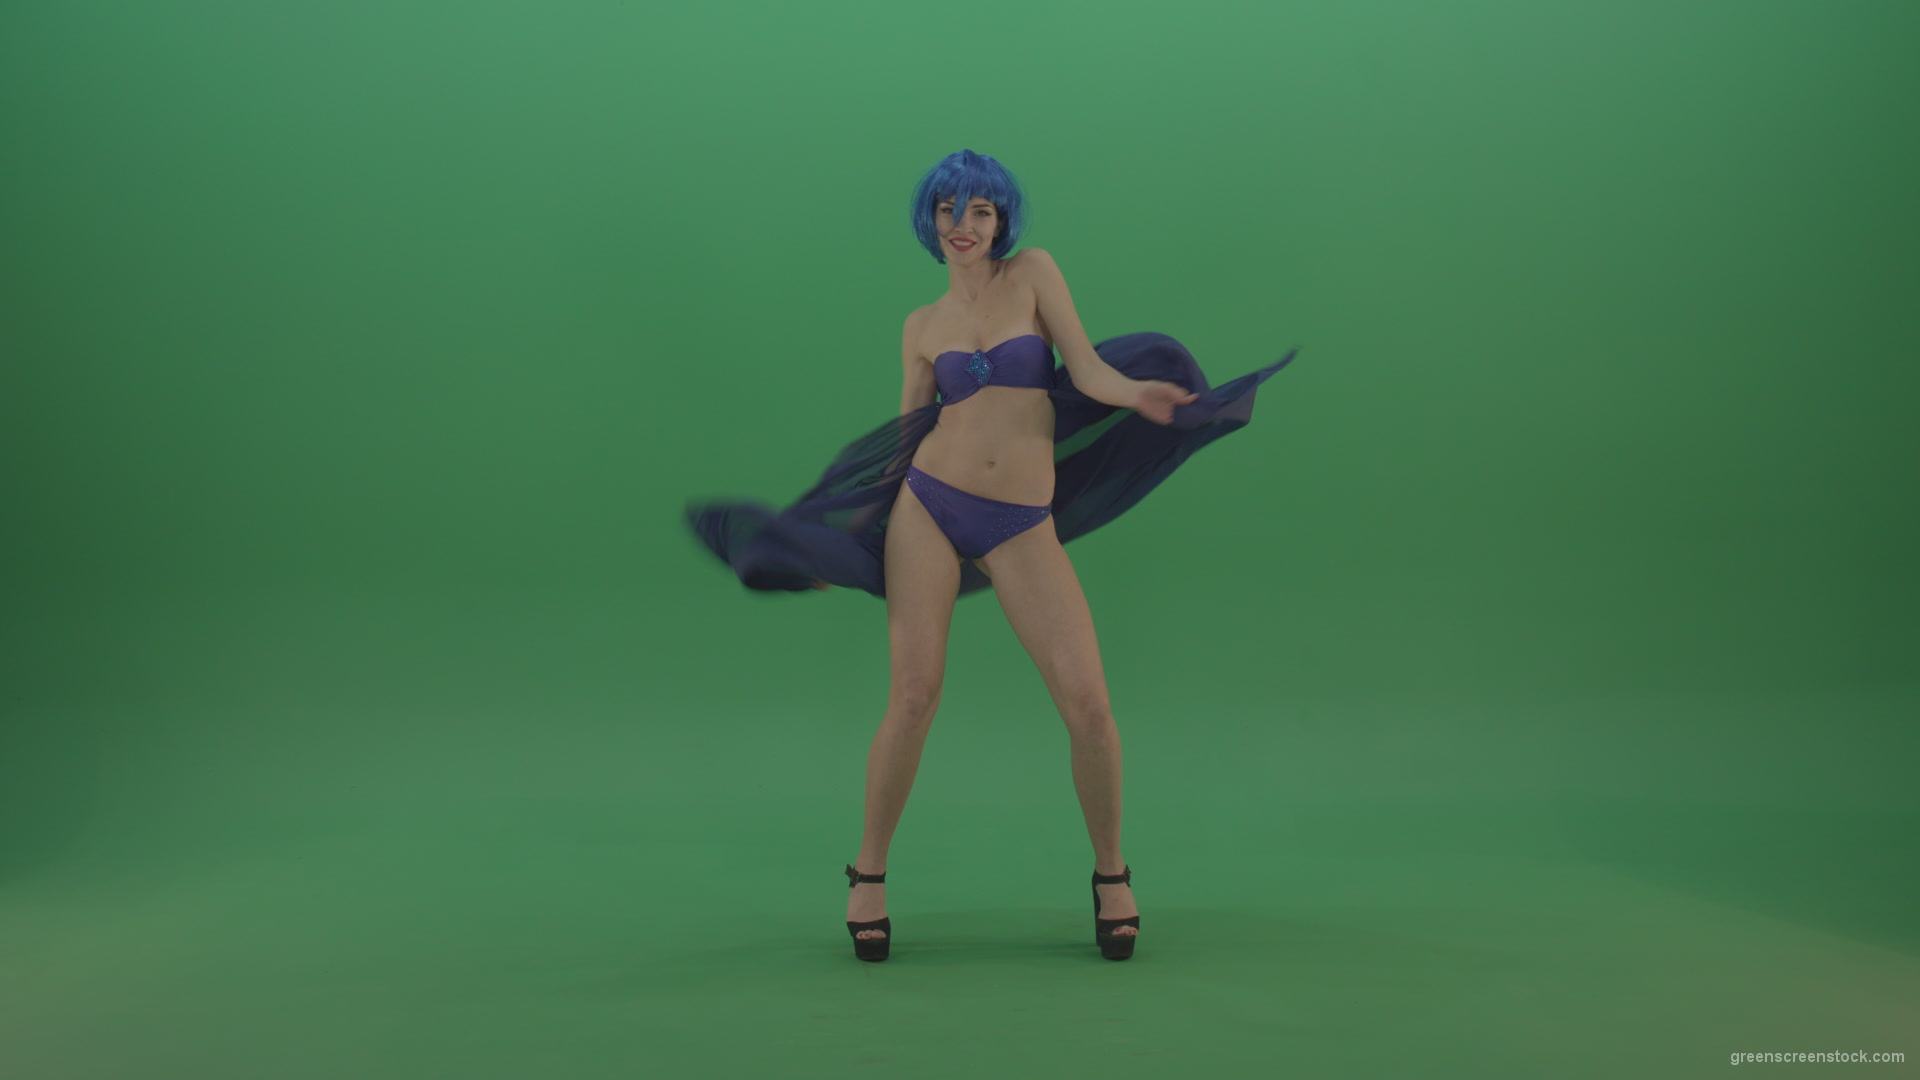 Full-size-erotic-young-girl-dancing-go-go-with-blue-dress-curtain-on-green-screen-1_004 Green Screen Stock